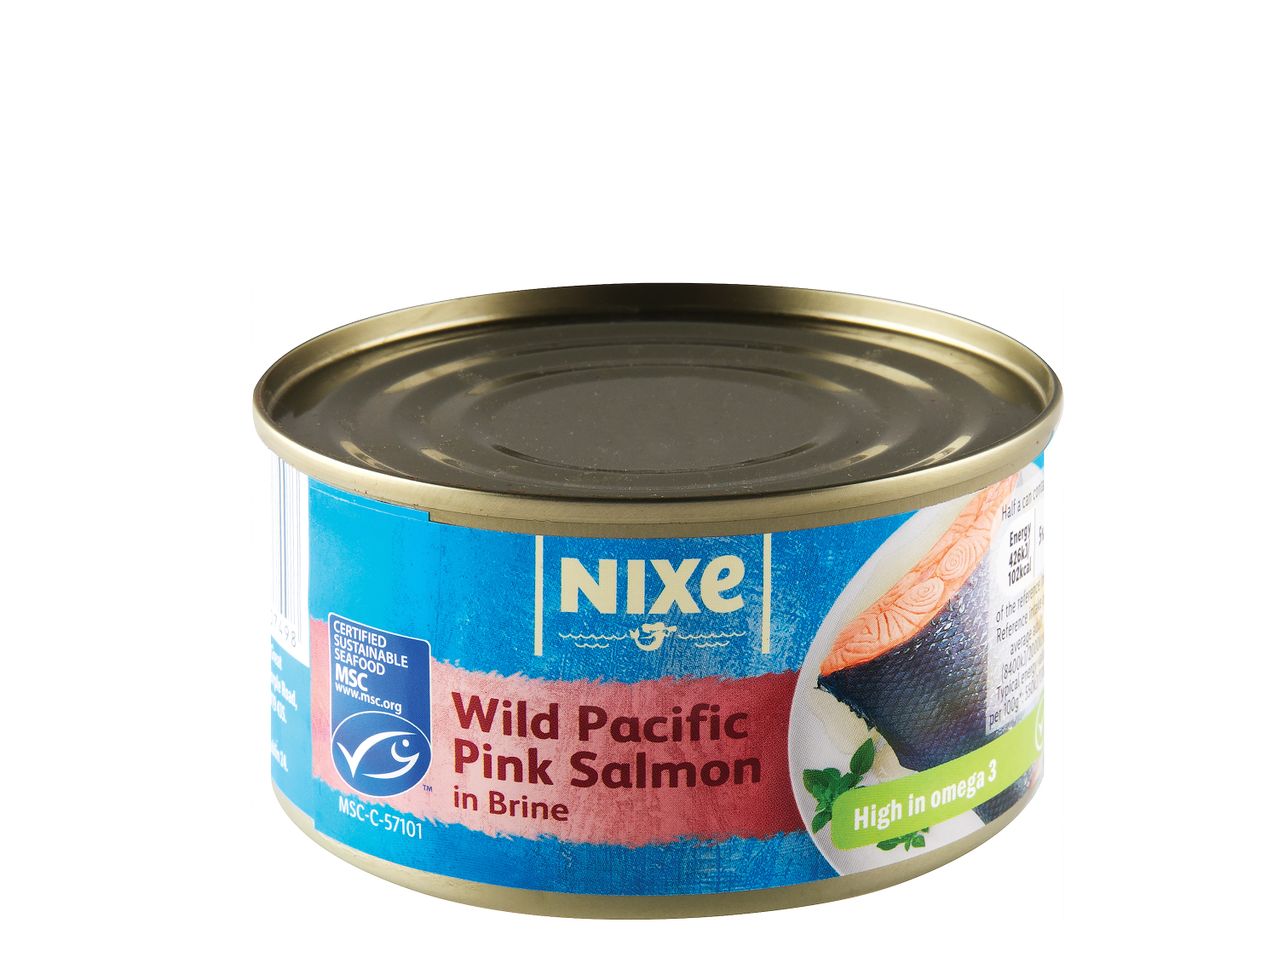 Go to full screen view: Nixe Wild Pacific Pink Salmon - Image 1